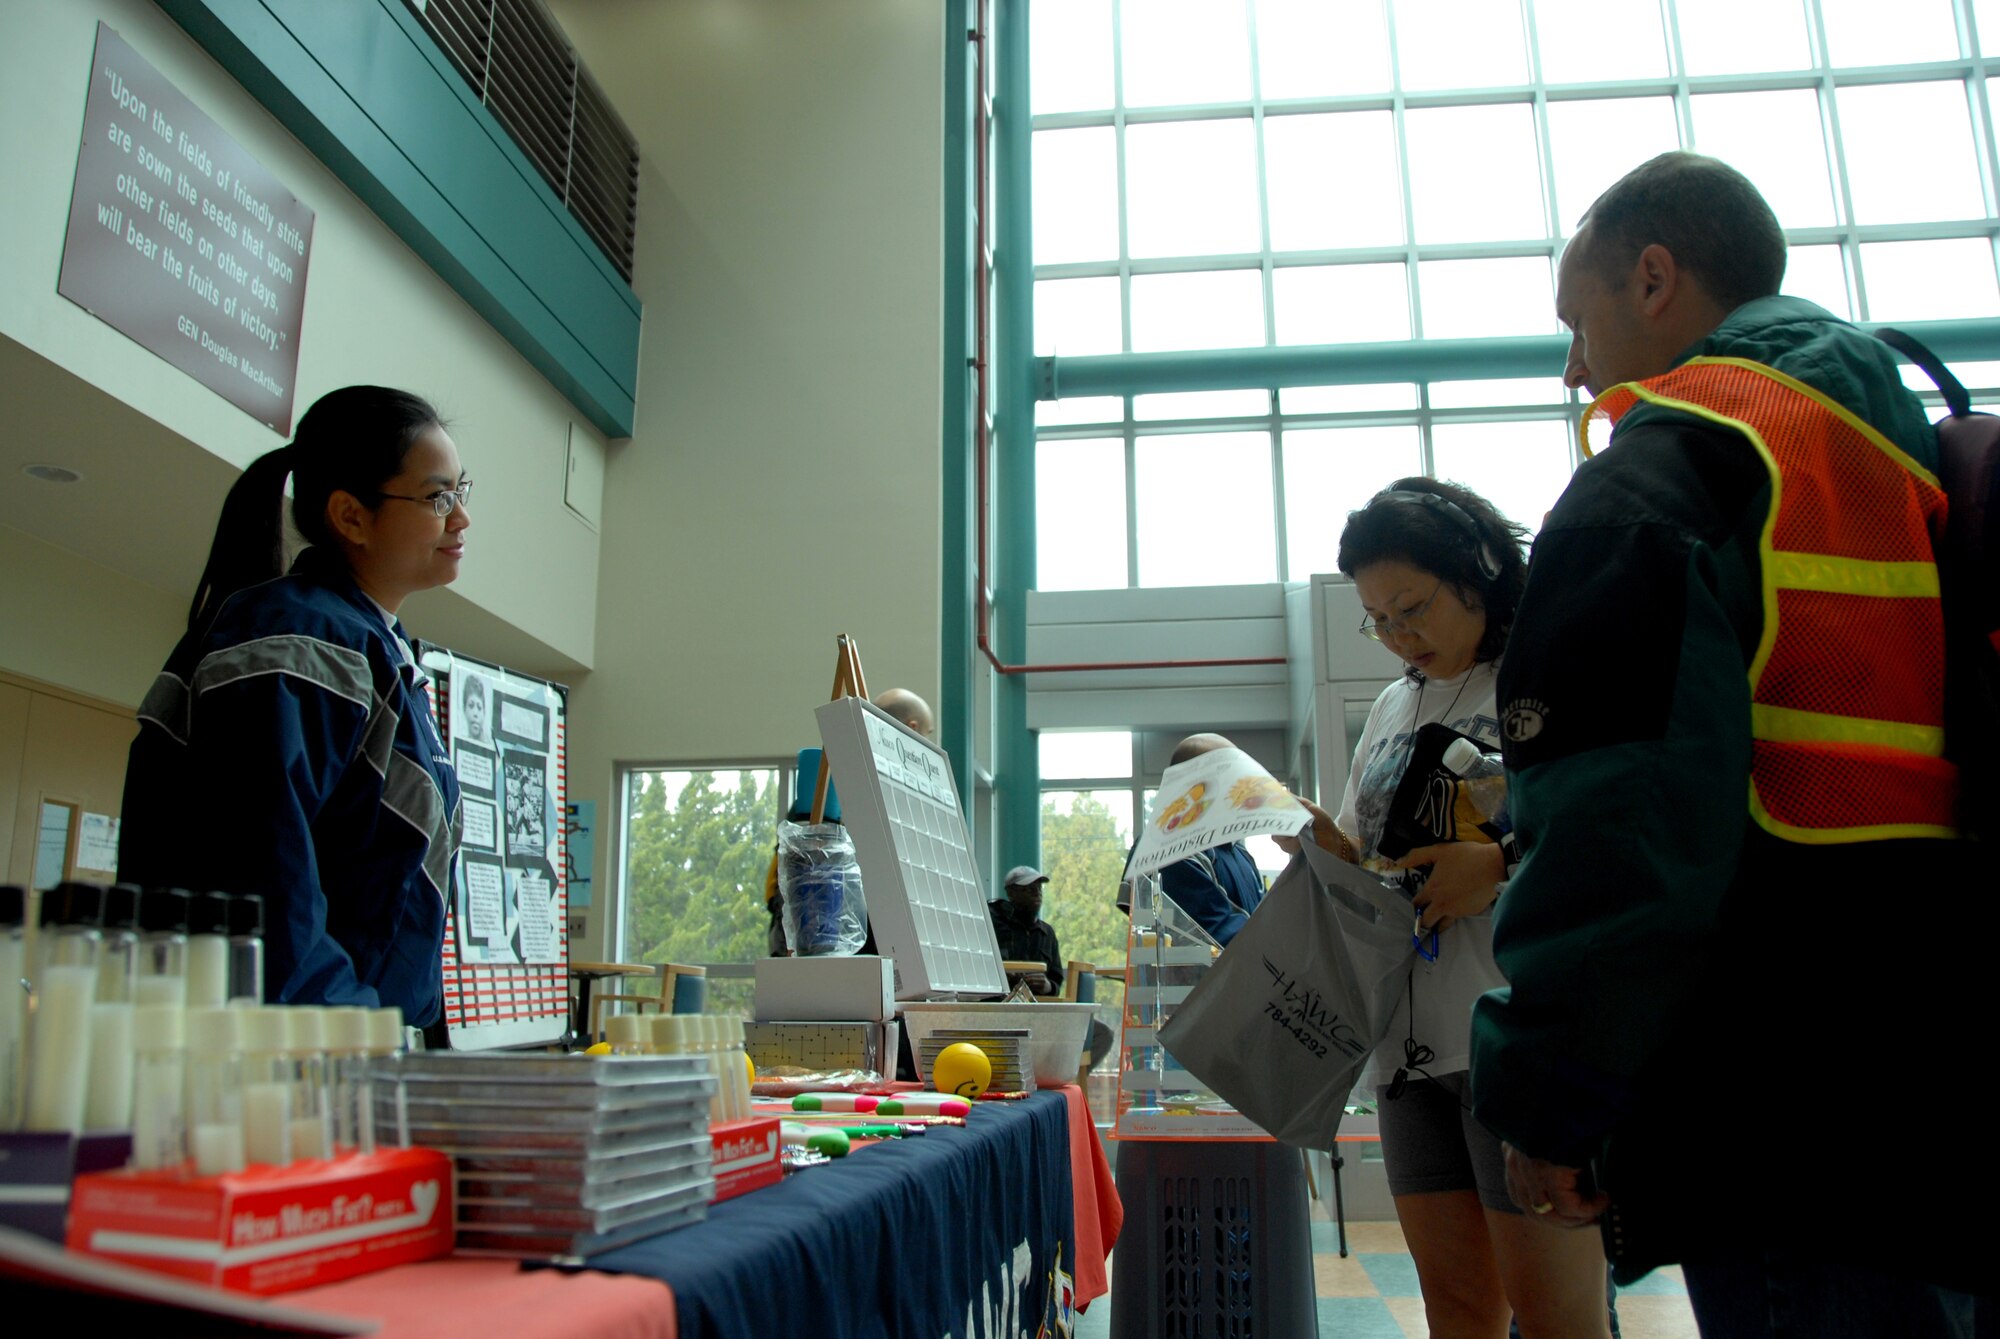 OSAN AIR BASE, Republic of Korea -- Members from the 51st Medical Group were at the Osan Fitness Center on Saturday as part of Women’s History Month. (U.S. Air Force photo by Airman 1st Class Chad Strohmeyer)